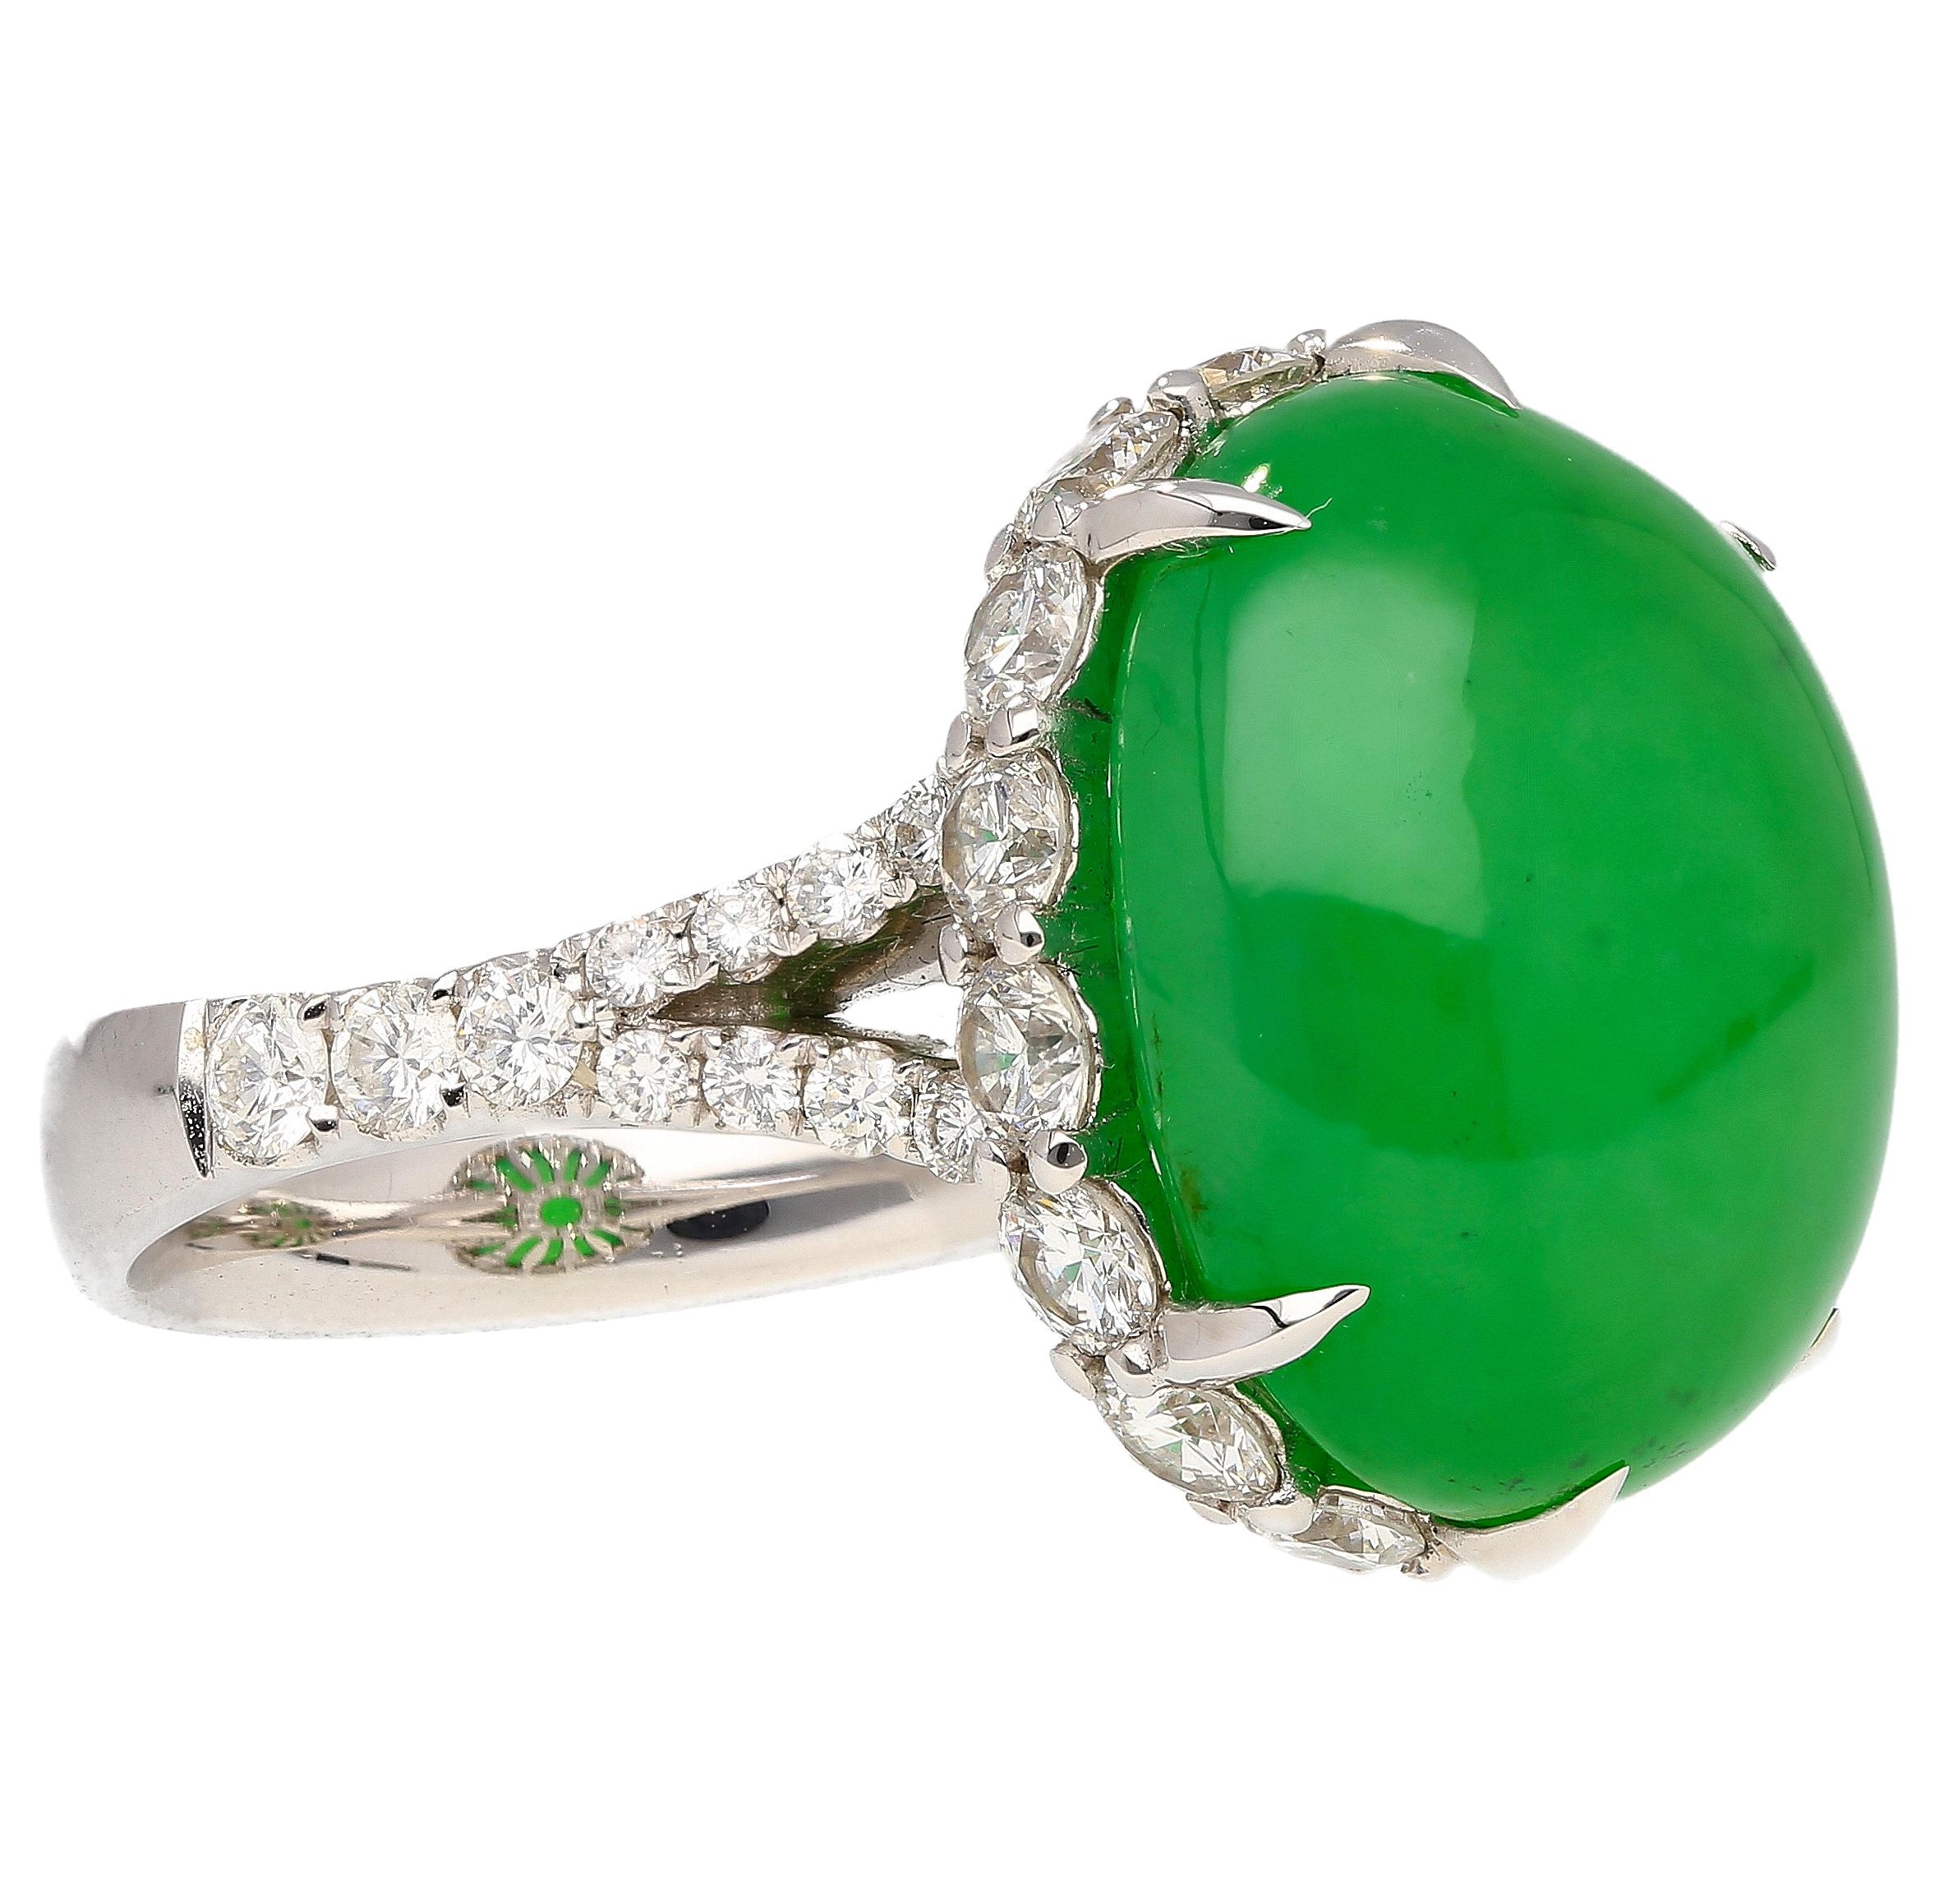 17.86 Carat Oval Cut Jadeite Jade and Diamond Ring in 18K White Gold In New Condition For Sale In Miami, FL